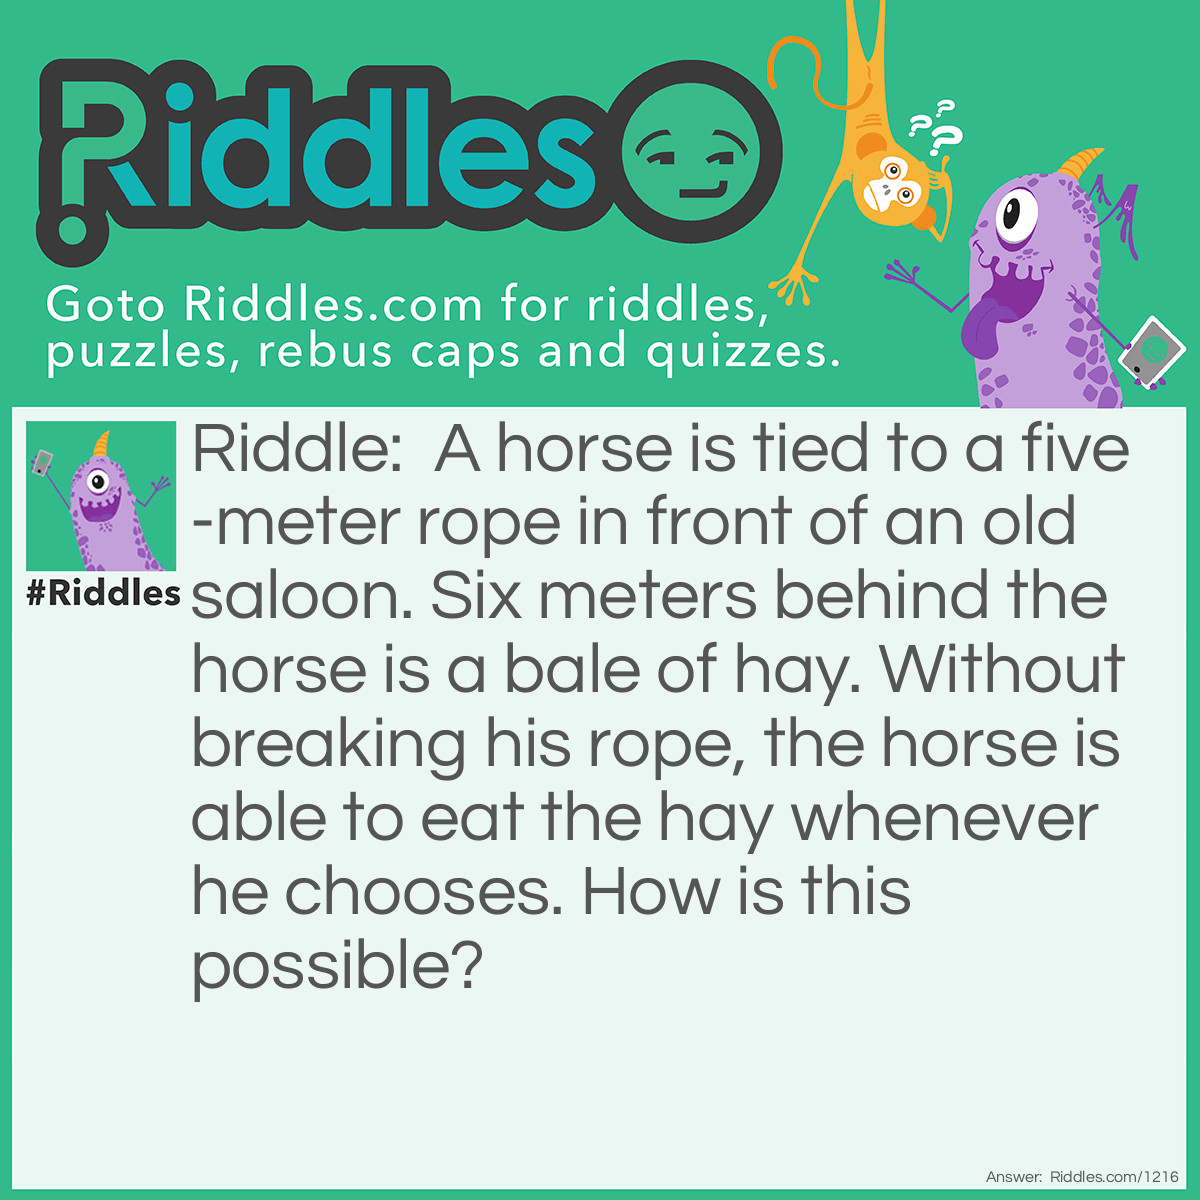 Riddle: A horse is tied to a five-meter rope in front of an old saloon. Six meters behind the horse is a bale of hay. Without breaking his rope, the horse is able to eat the hay whenever he chooses.
How is this possible? Answer: The rope is not tied to anything else.